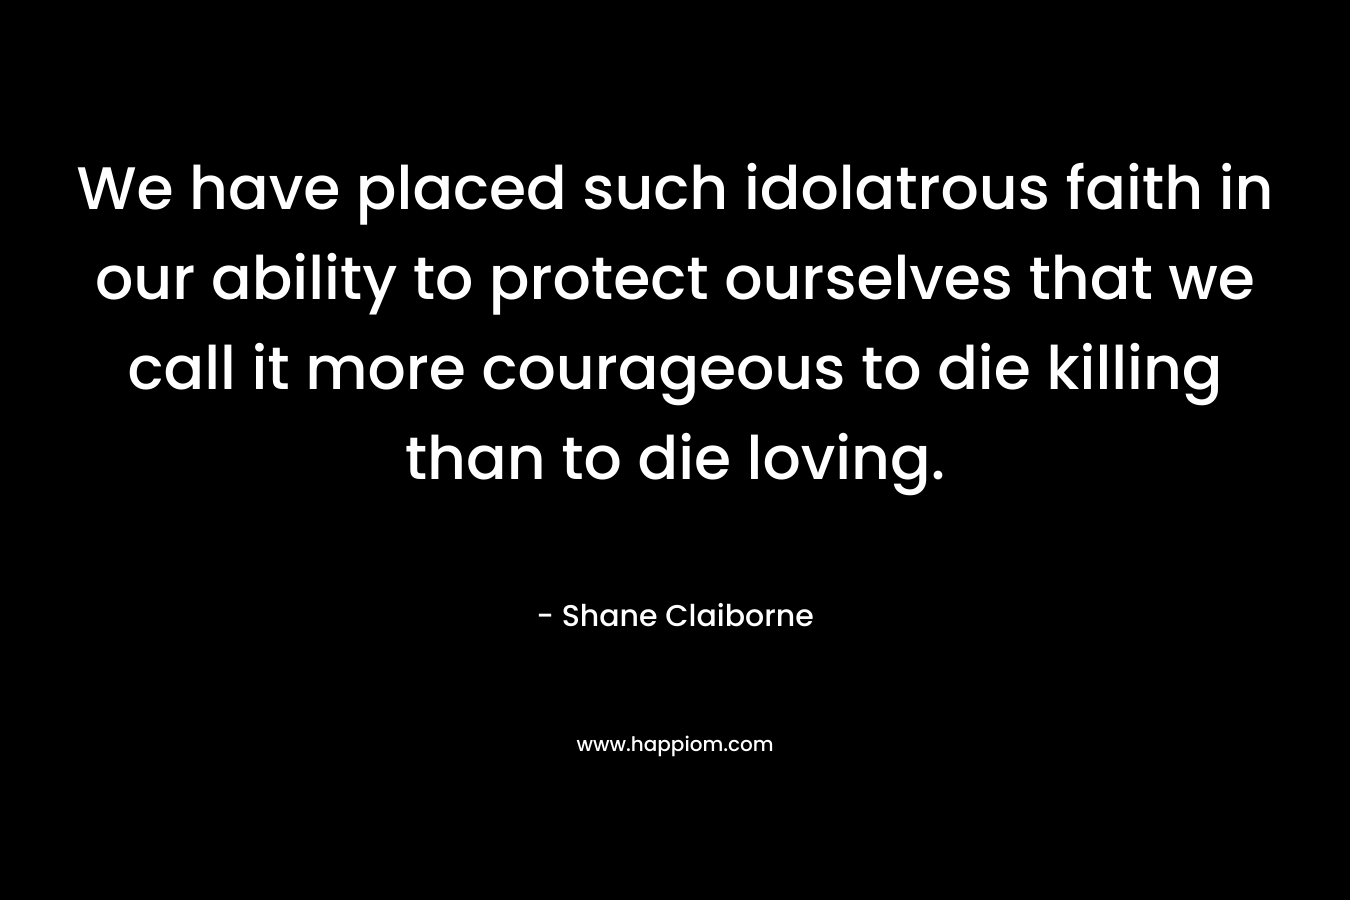 We have placed such idolatrous faith in our ability to protect ourselves that we call it more courageous to die killing than to die loving.